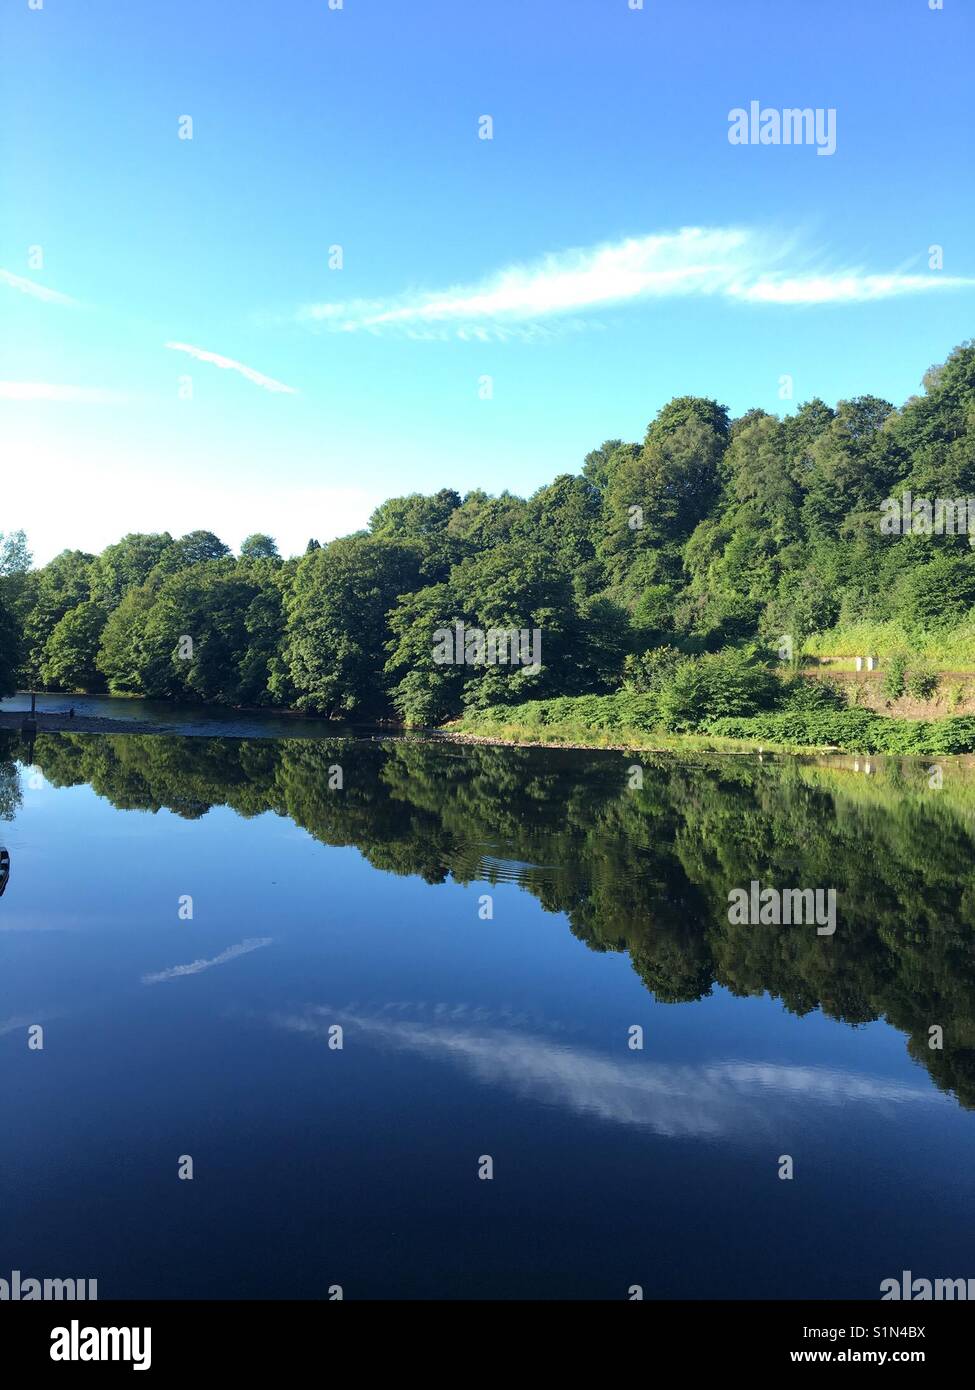 Upright format view of trees and sky reflected in the still waters of a river Stock Photo